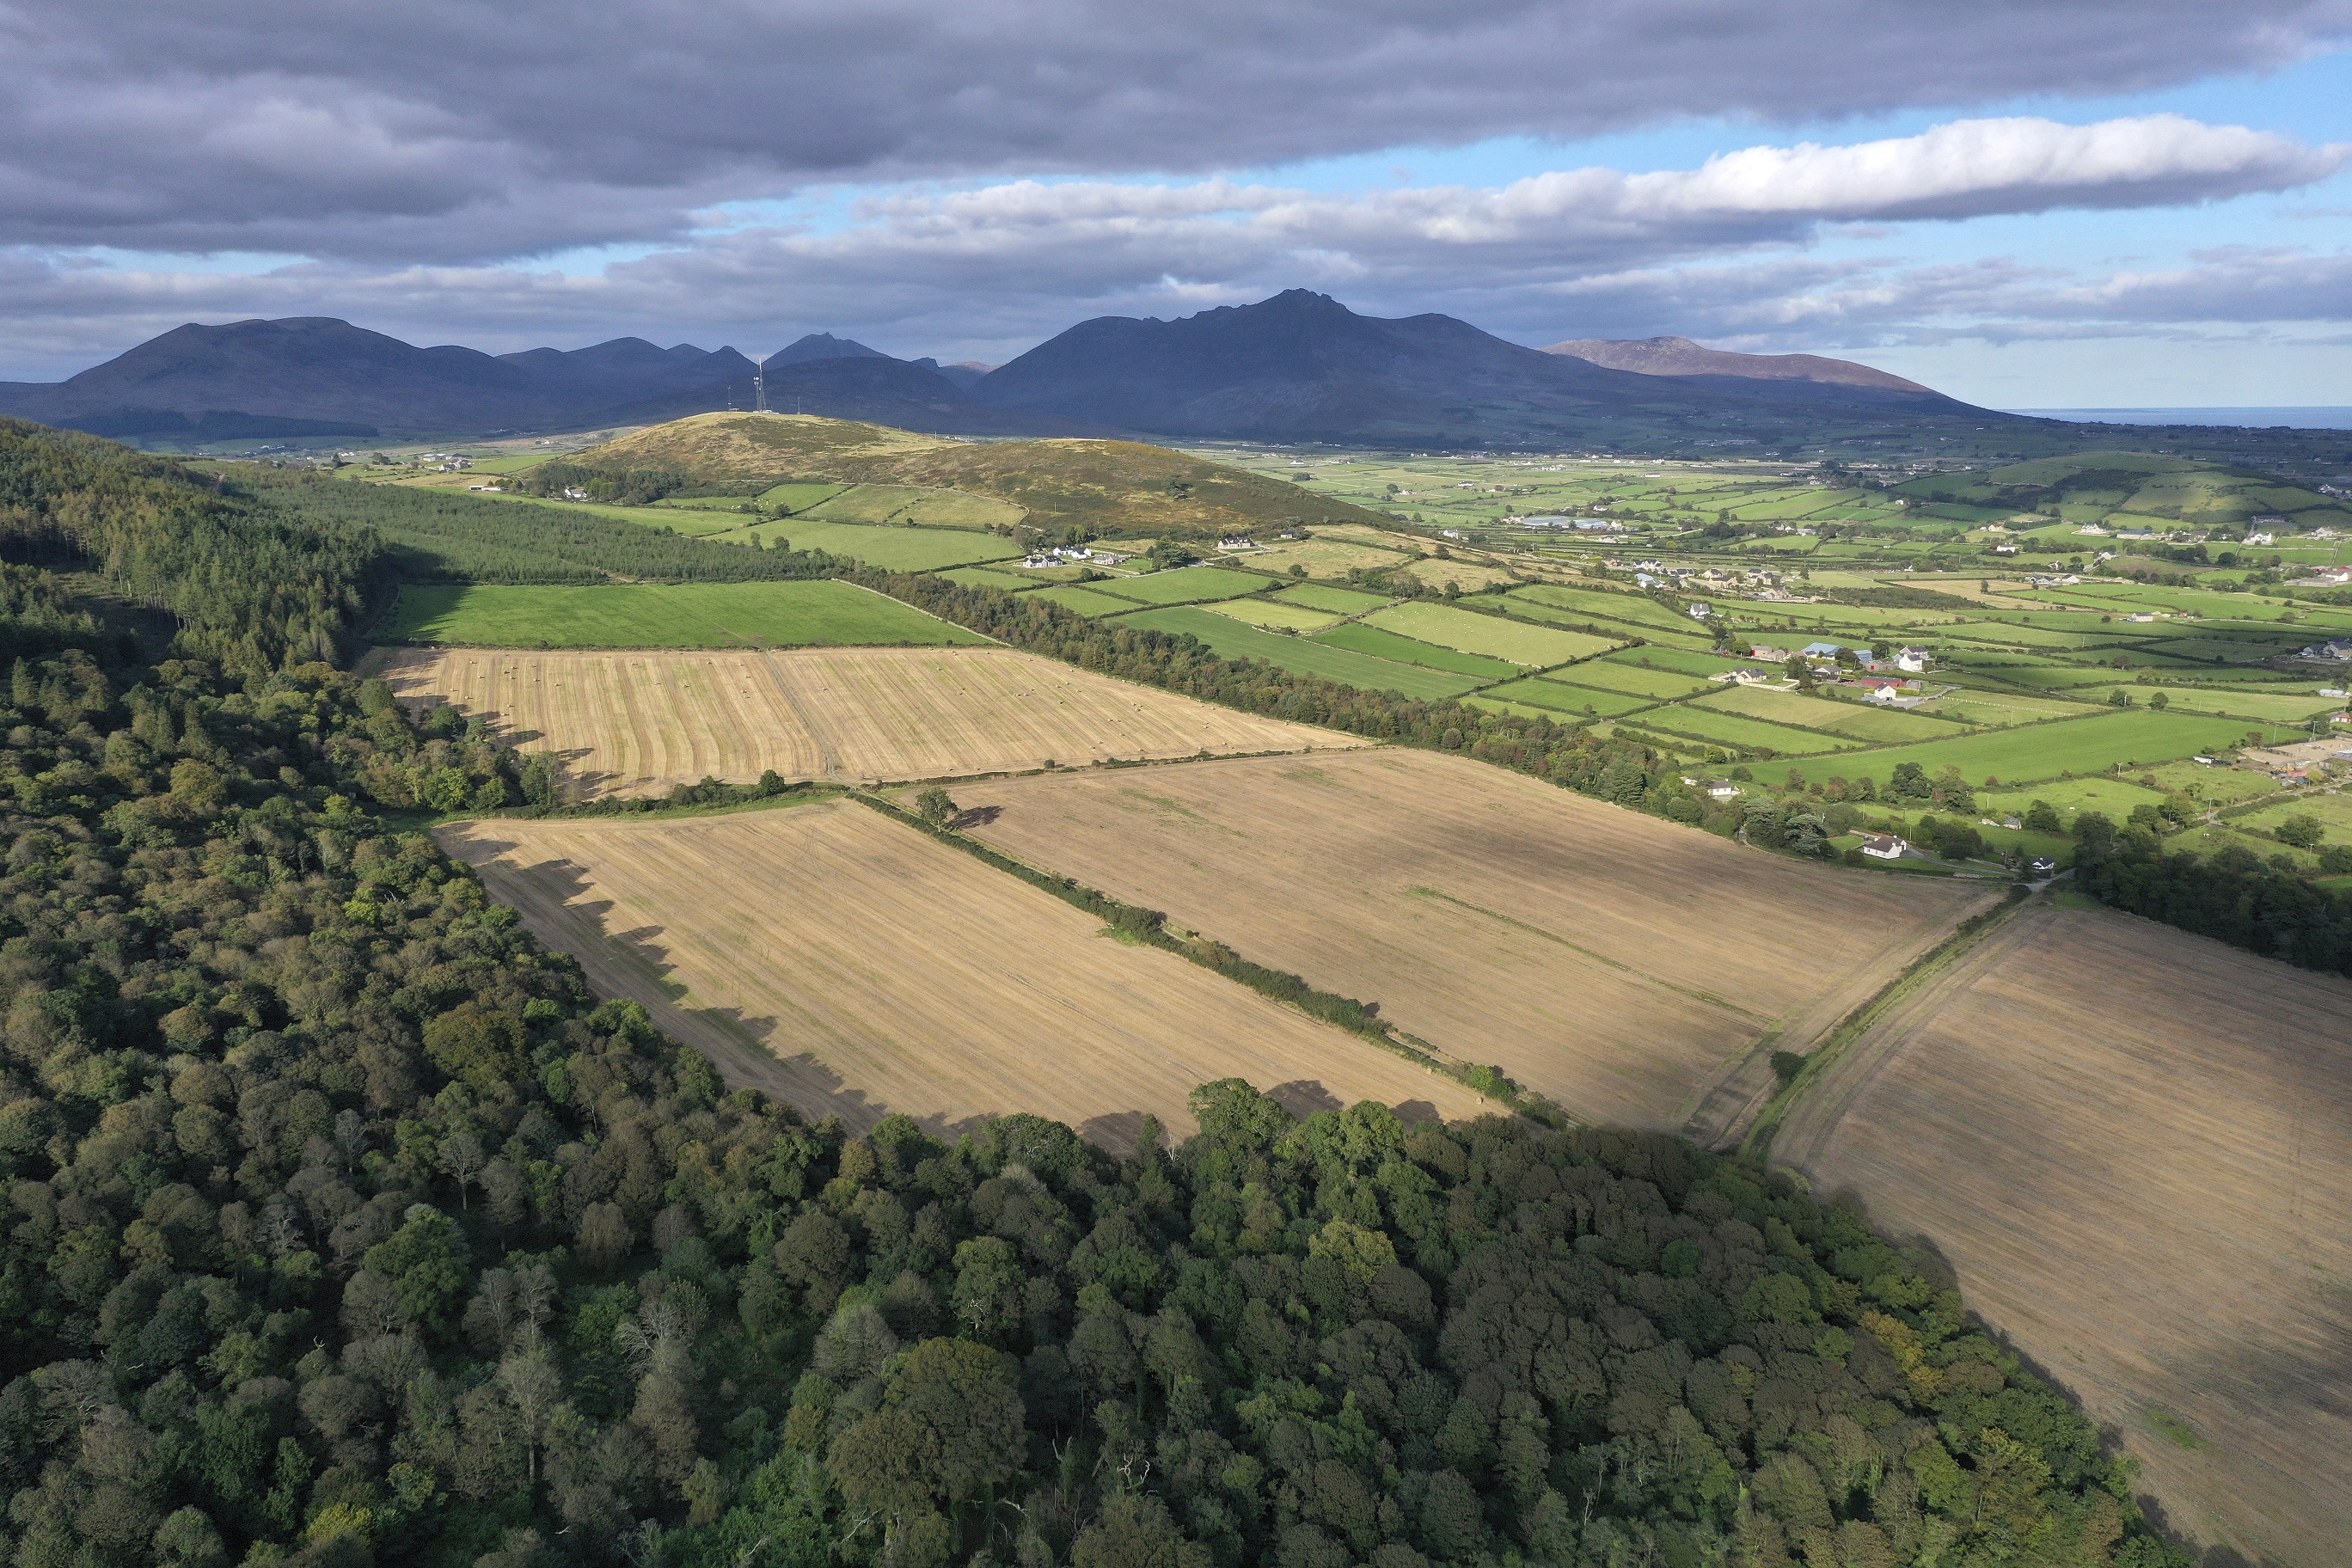 The Woodland Trust is hoping to purchase an additional 46 hectares of Mourne Park